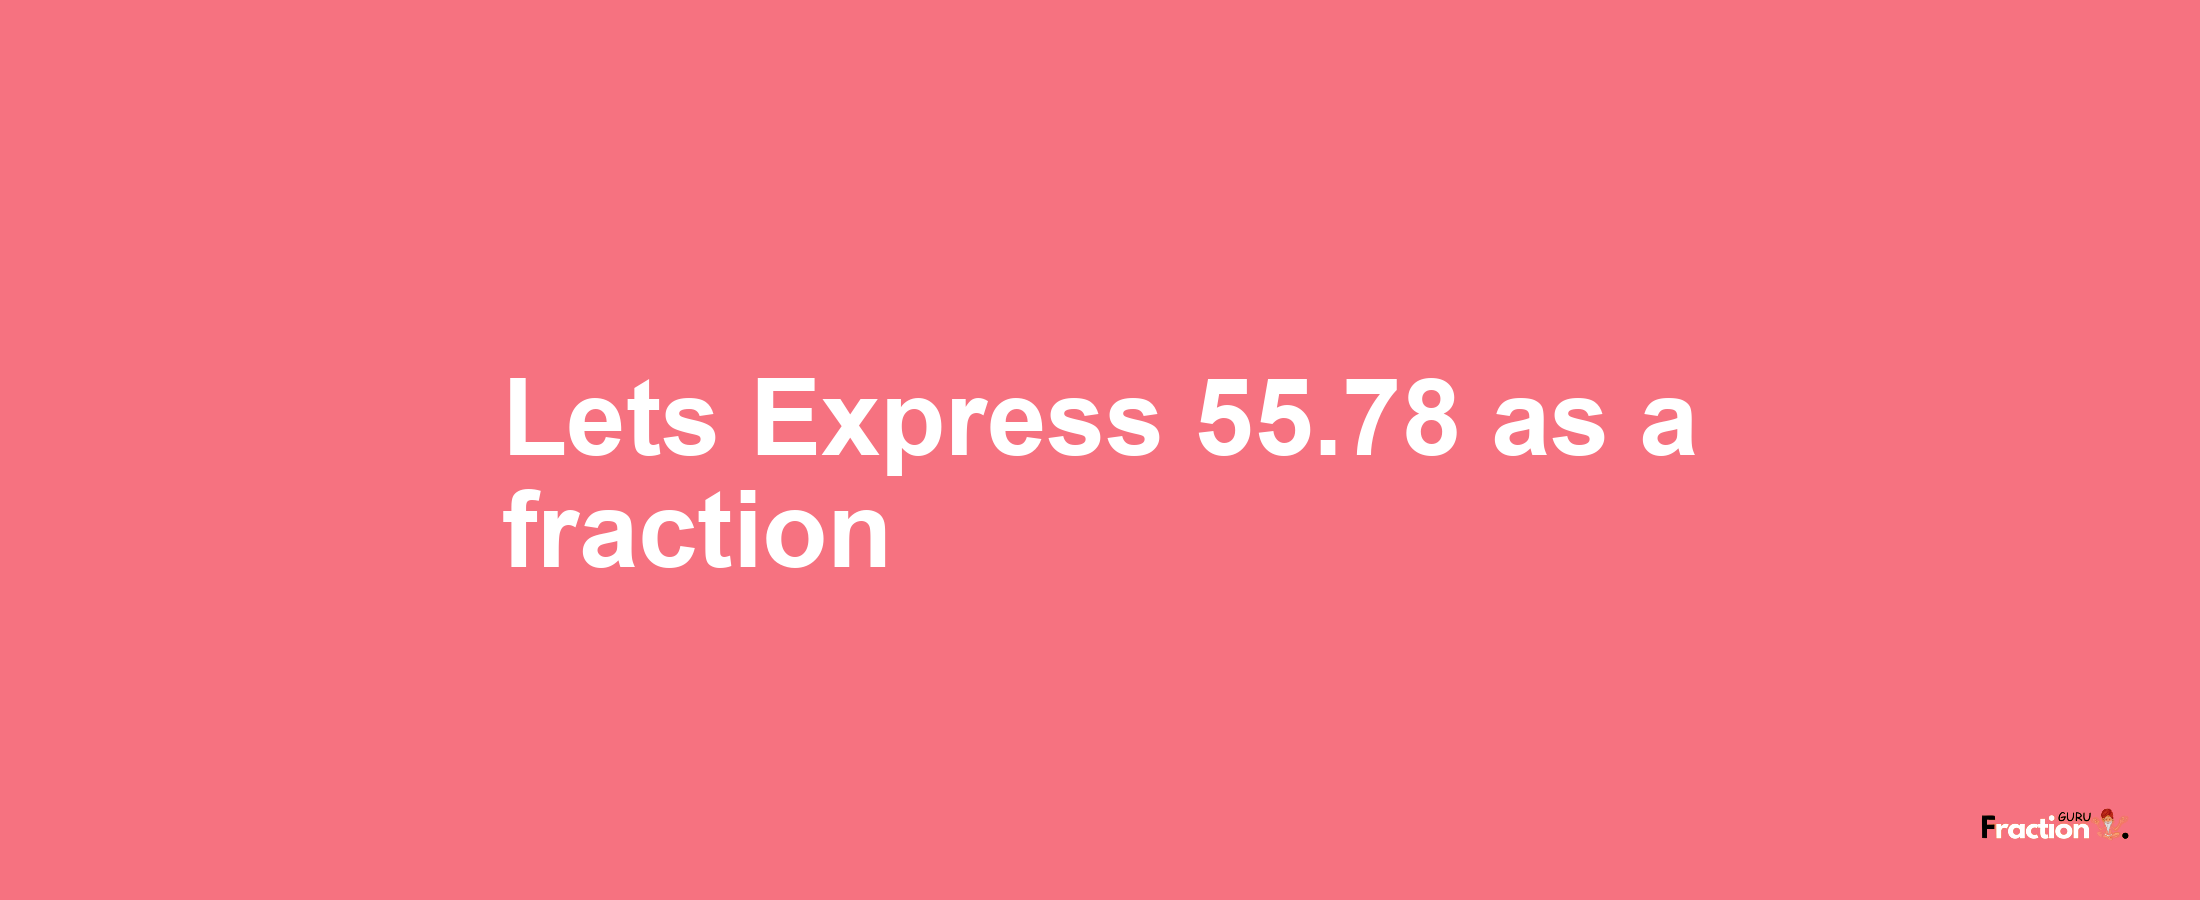 Lets Express 55.78 as afraction